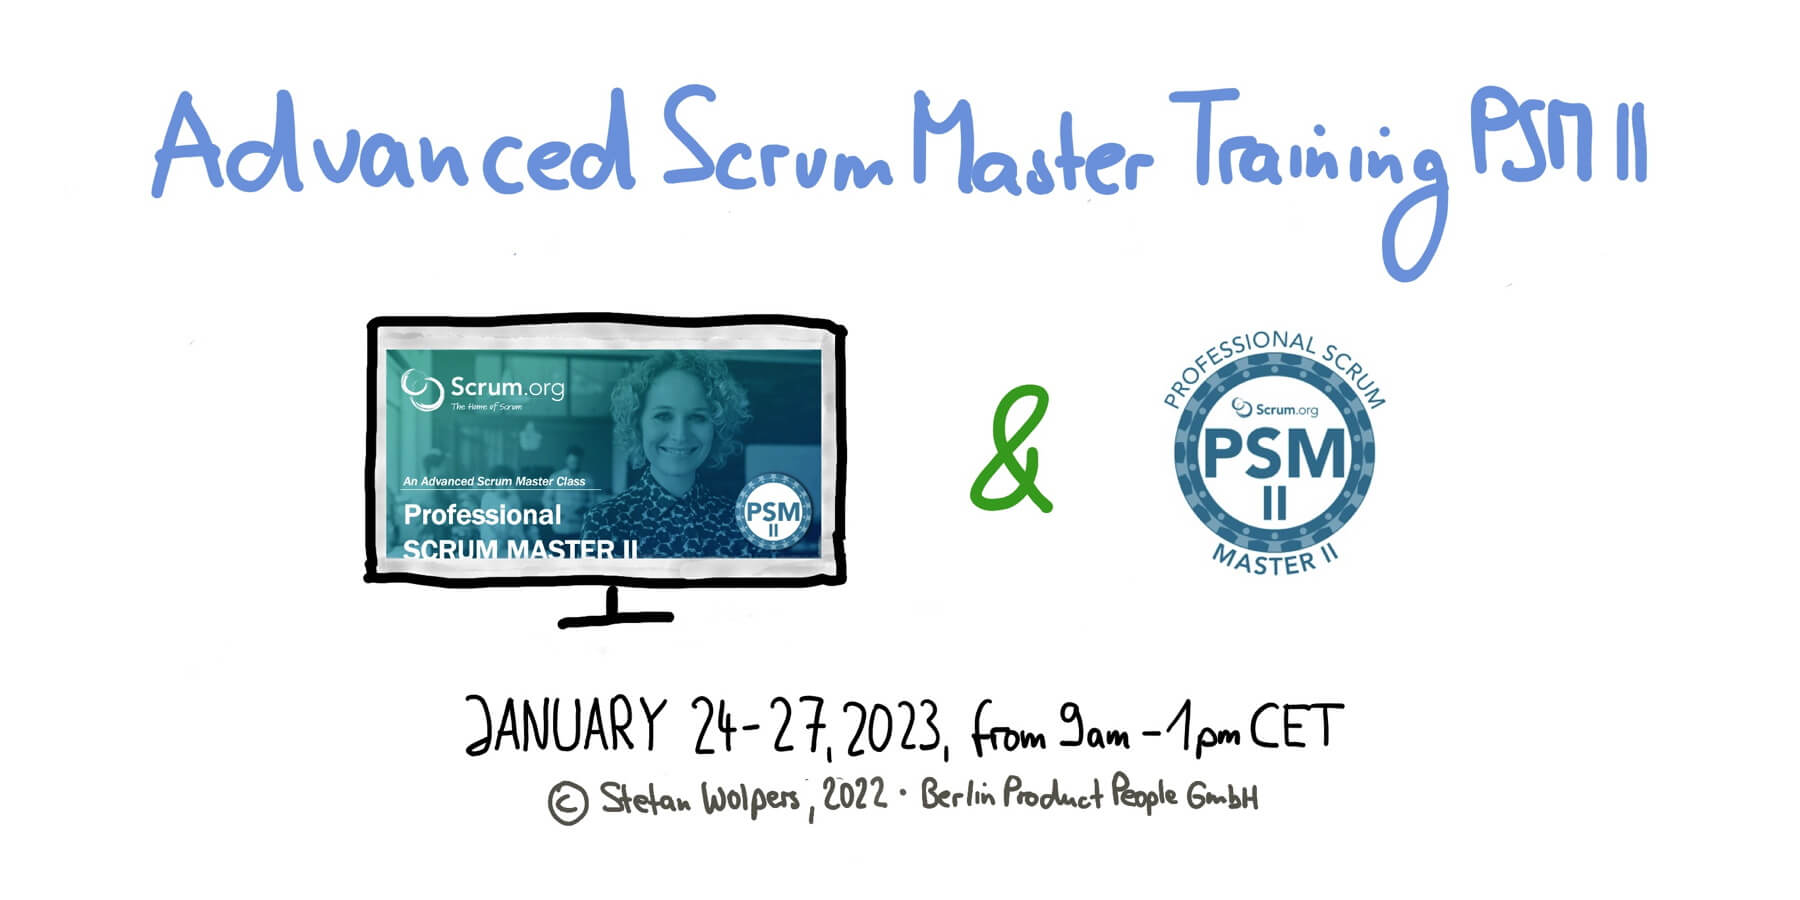 Advanced Professional Scrum Master Online Training PSM II Certificate January 2023 — Berlin Product People GmbH — BER-90